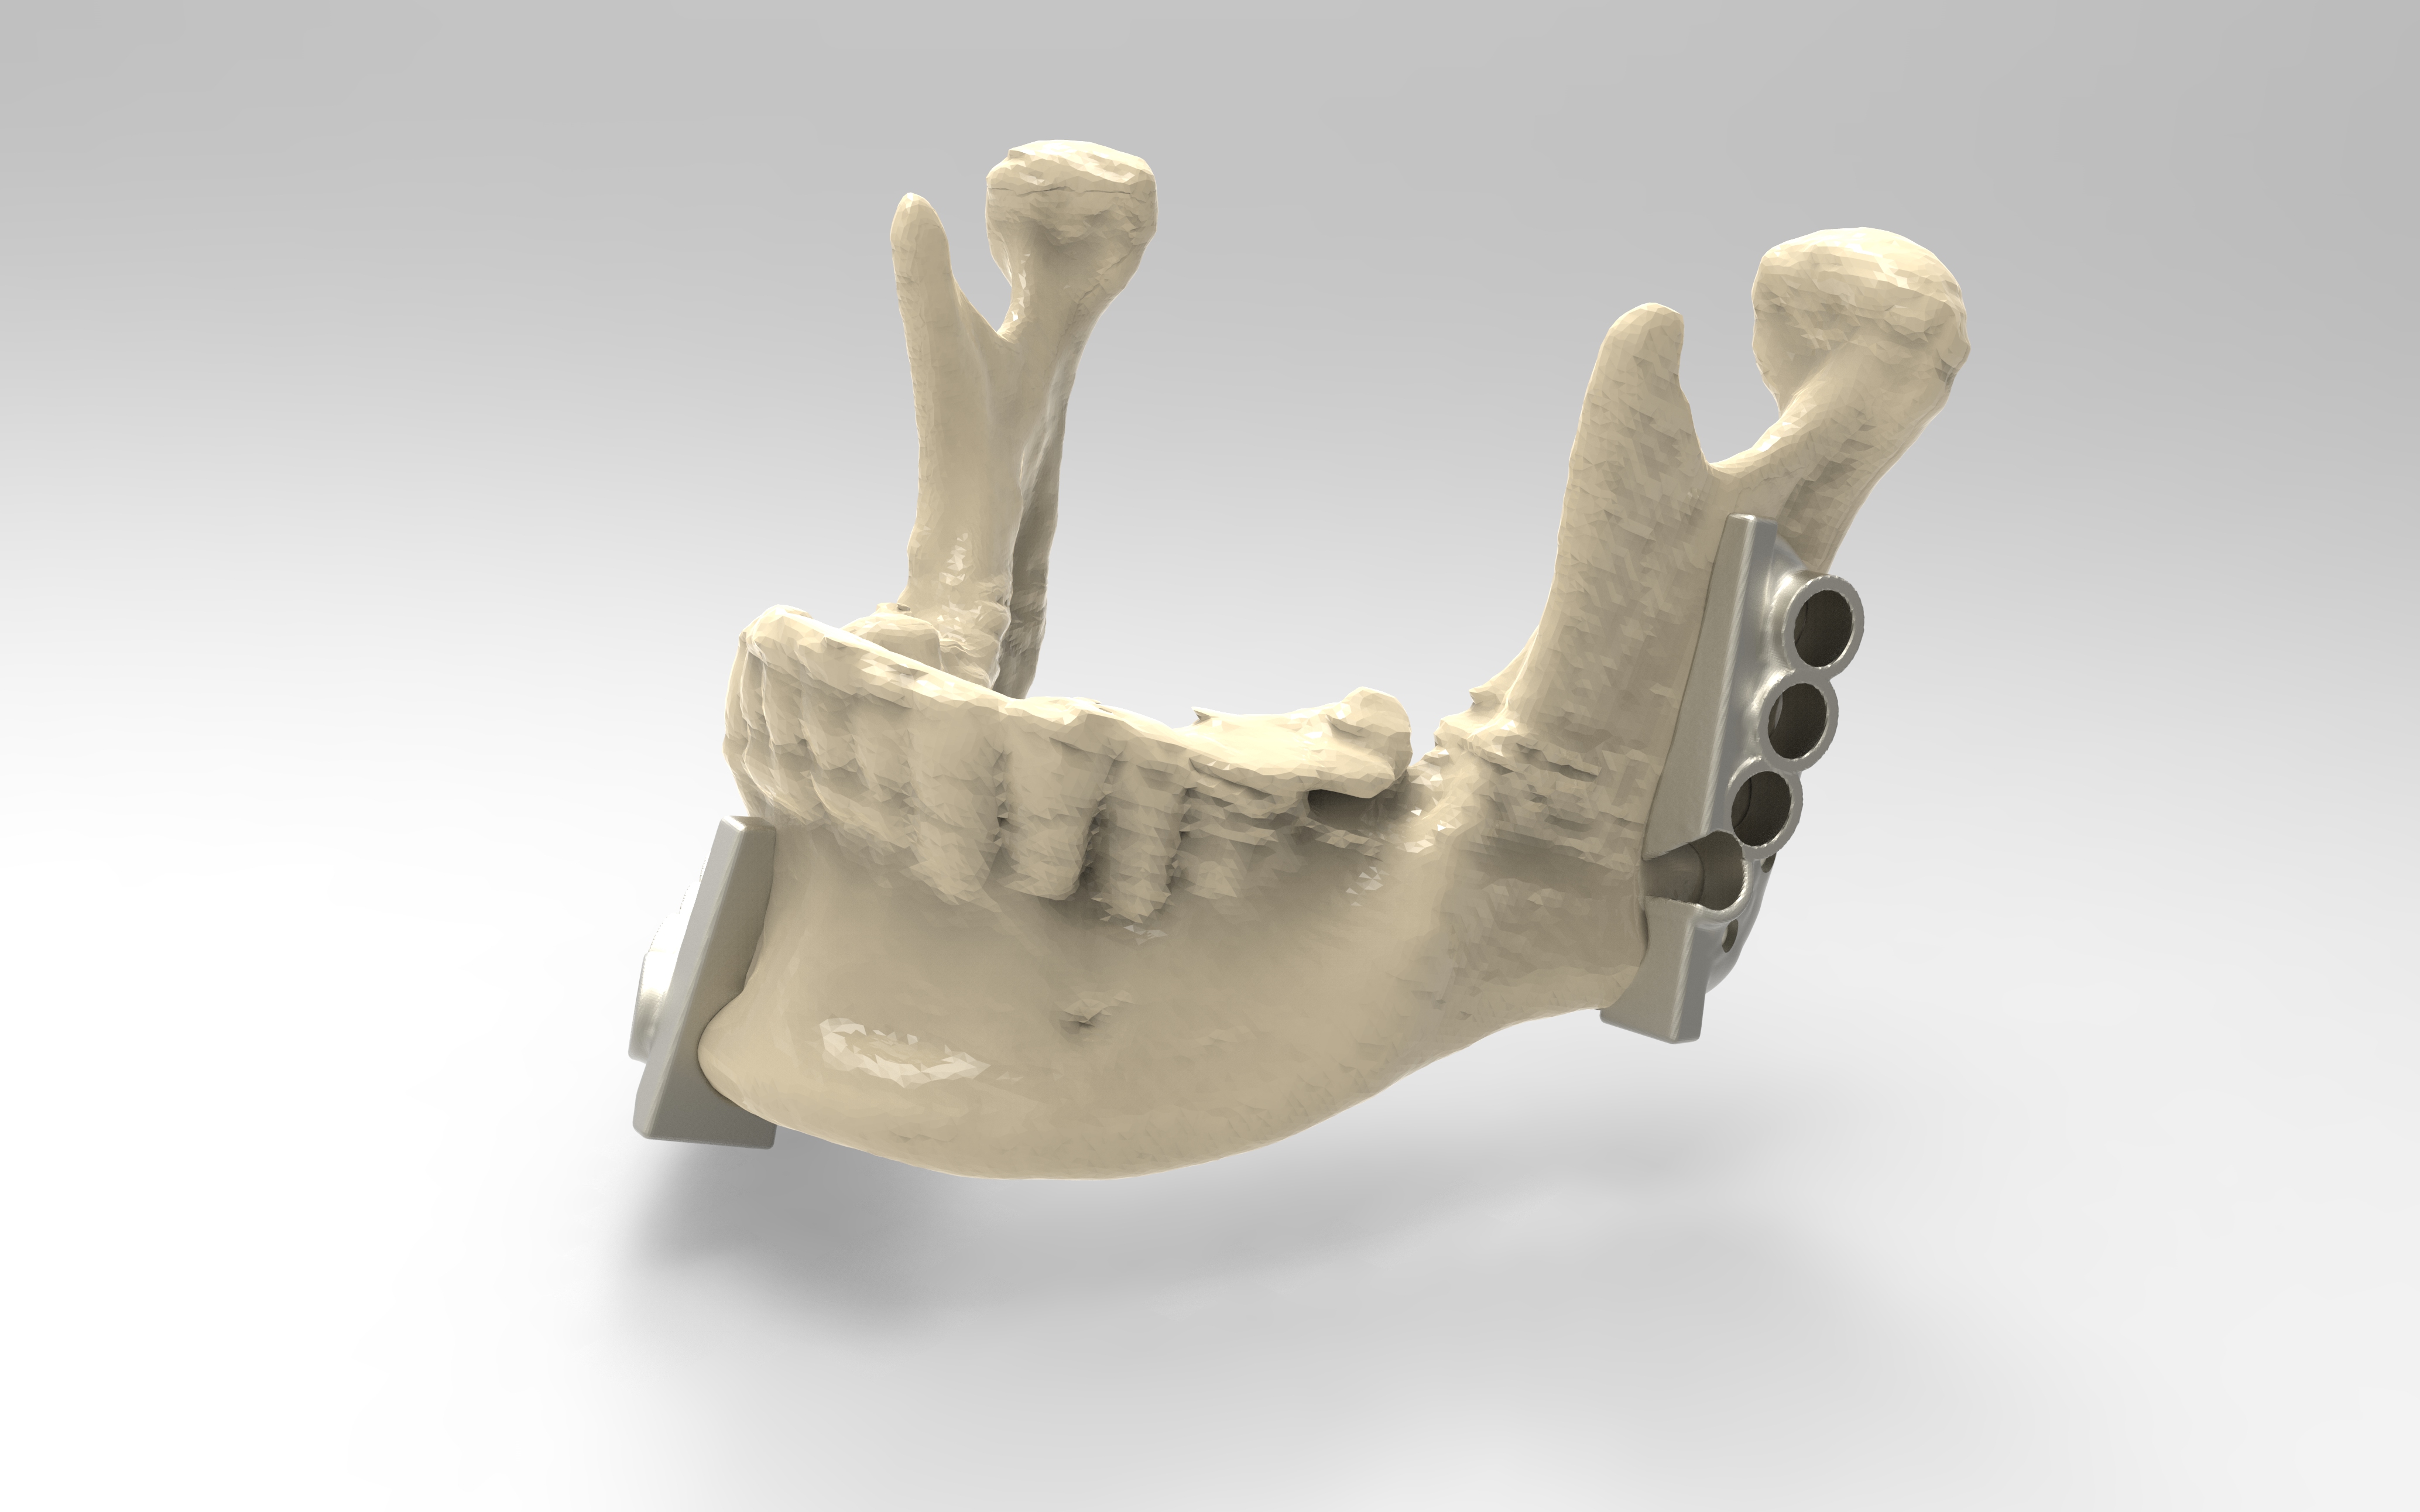 Jaw model with cutting guides